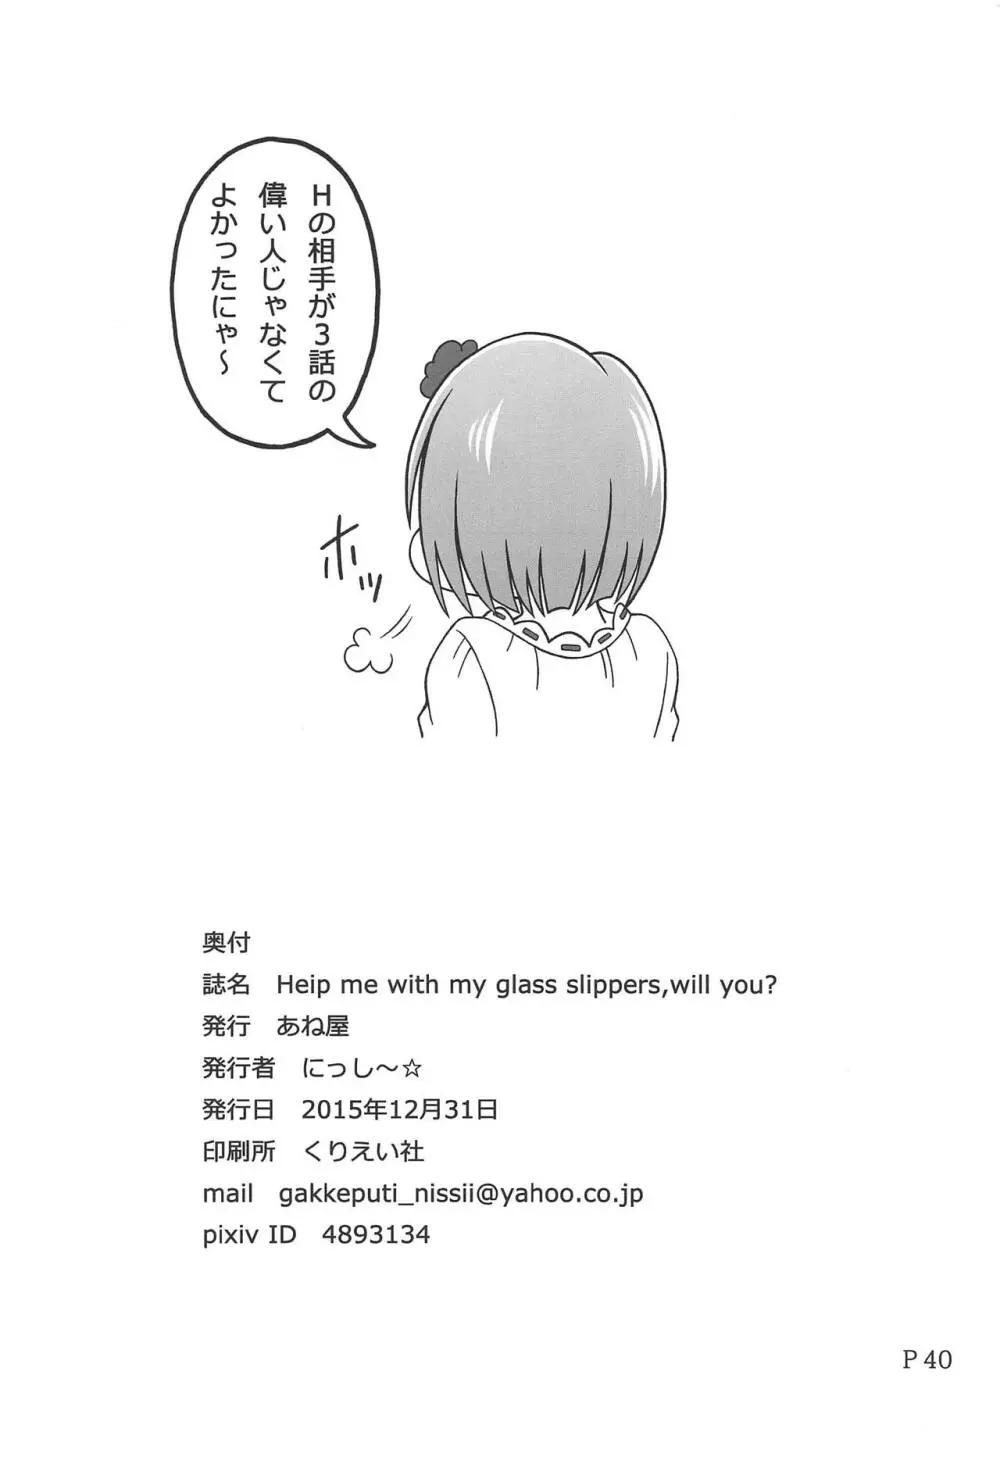 Help me with my glass slippers, will you? 41ページ